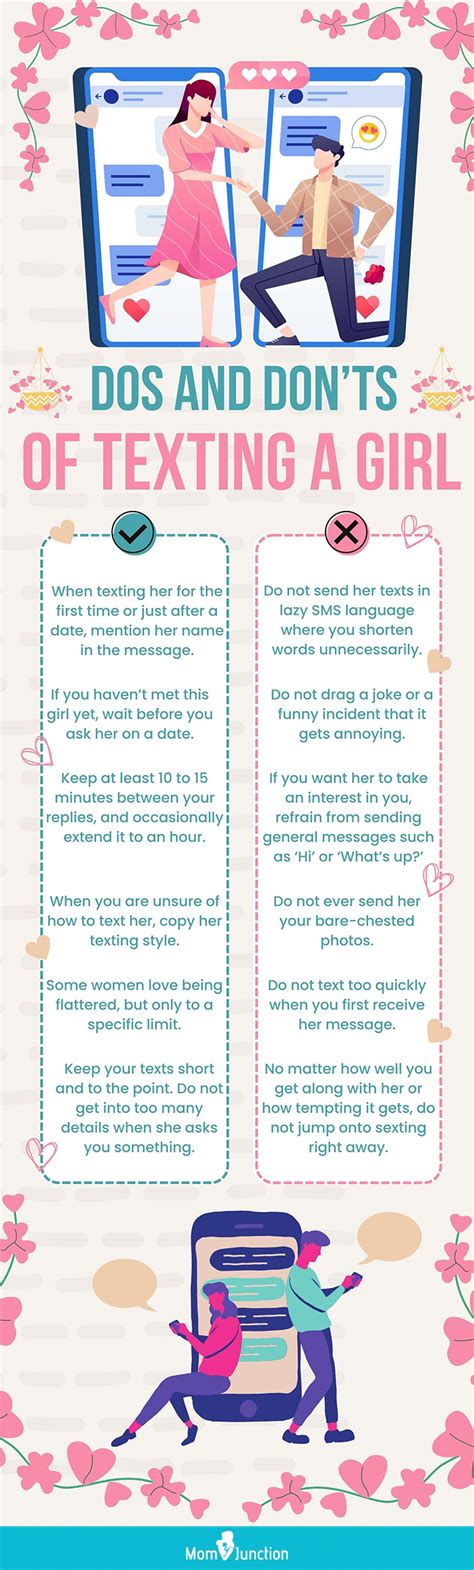 How often should a girl text a guy?